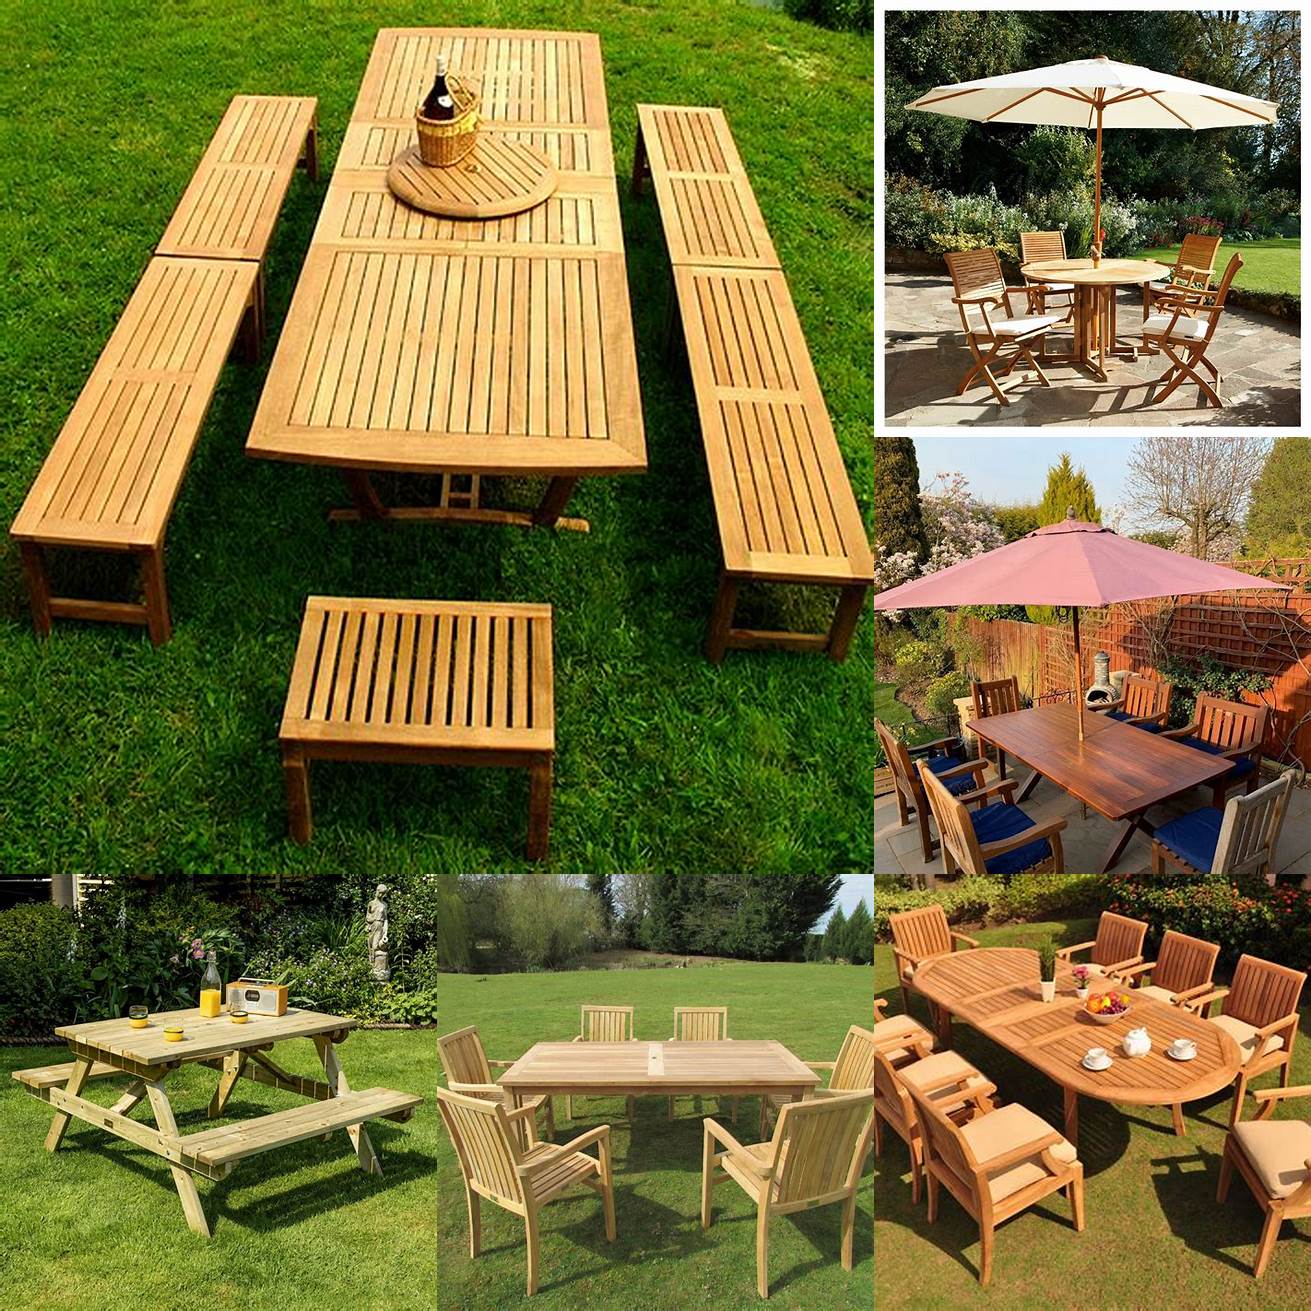 Teak Picnic Table and Benches With Parasol